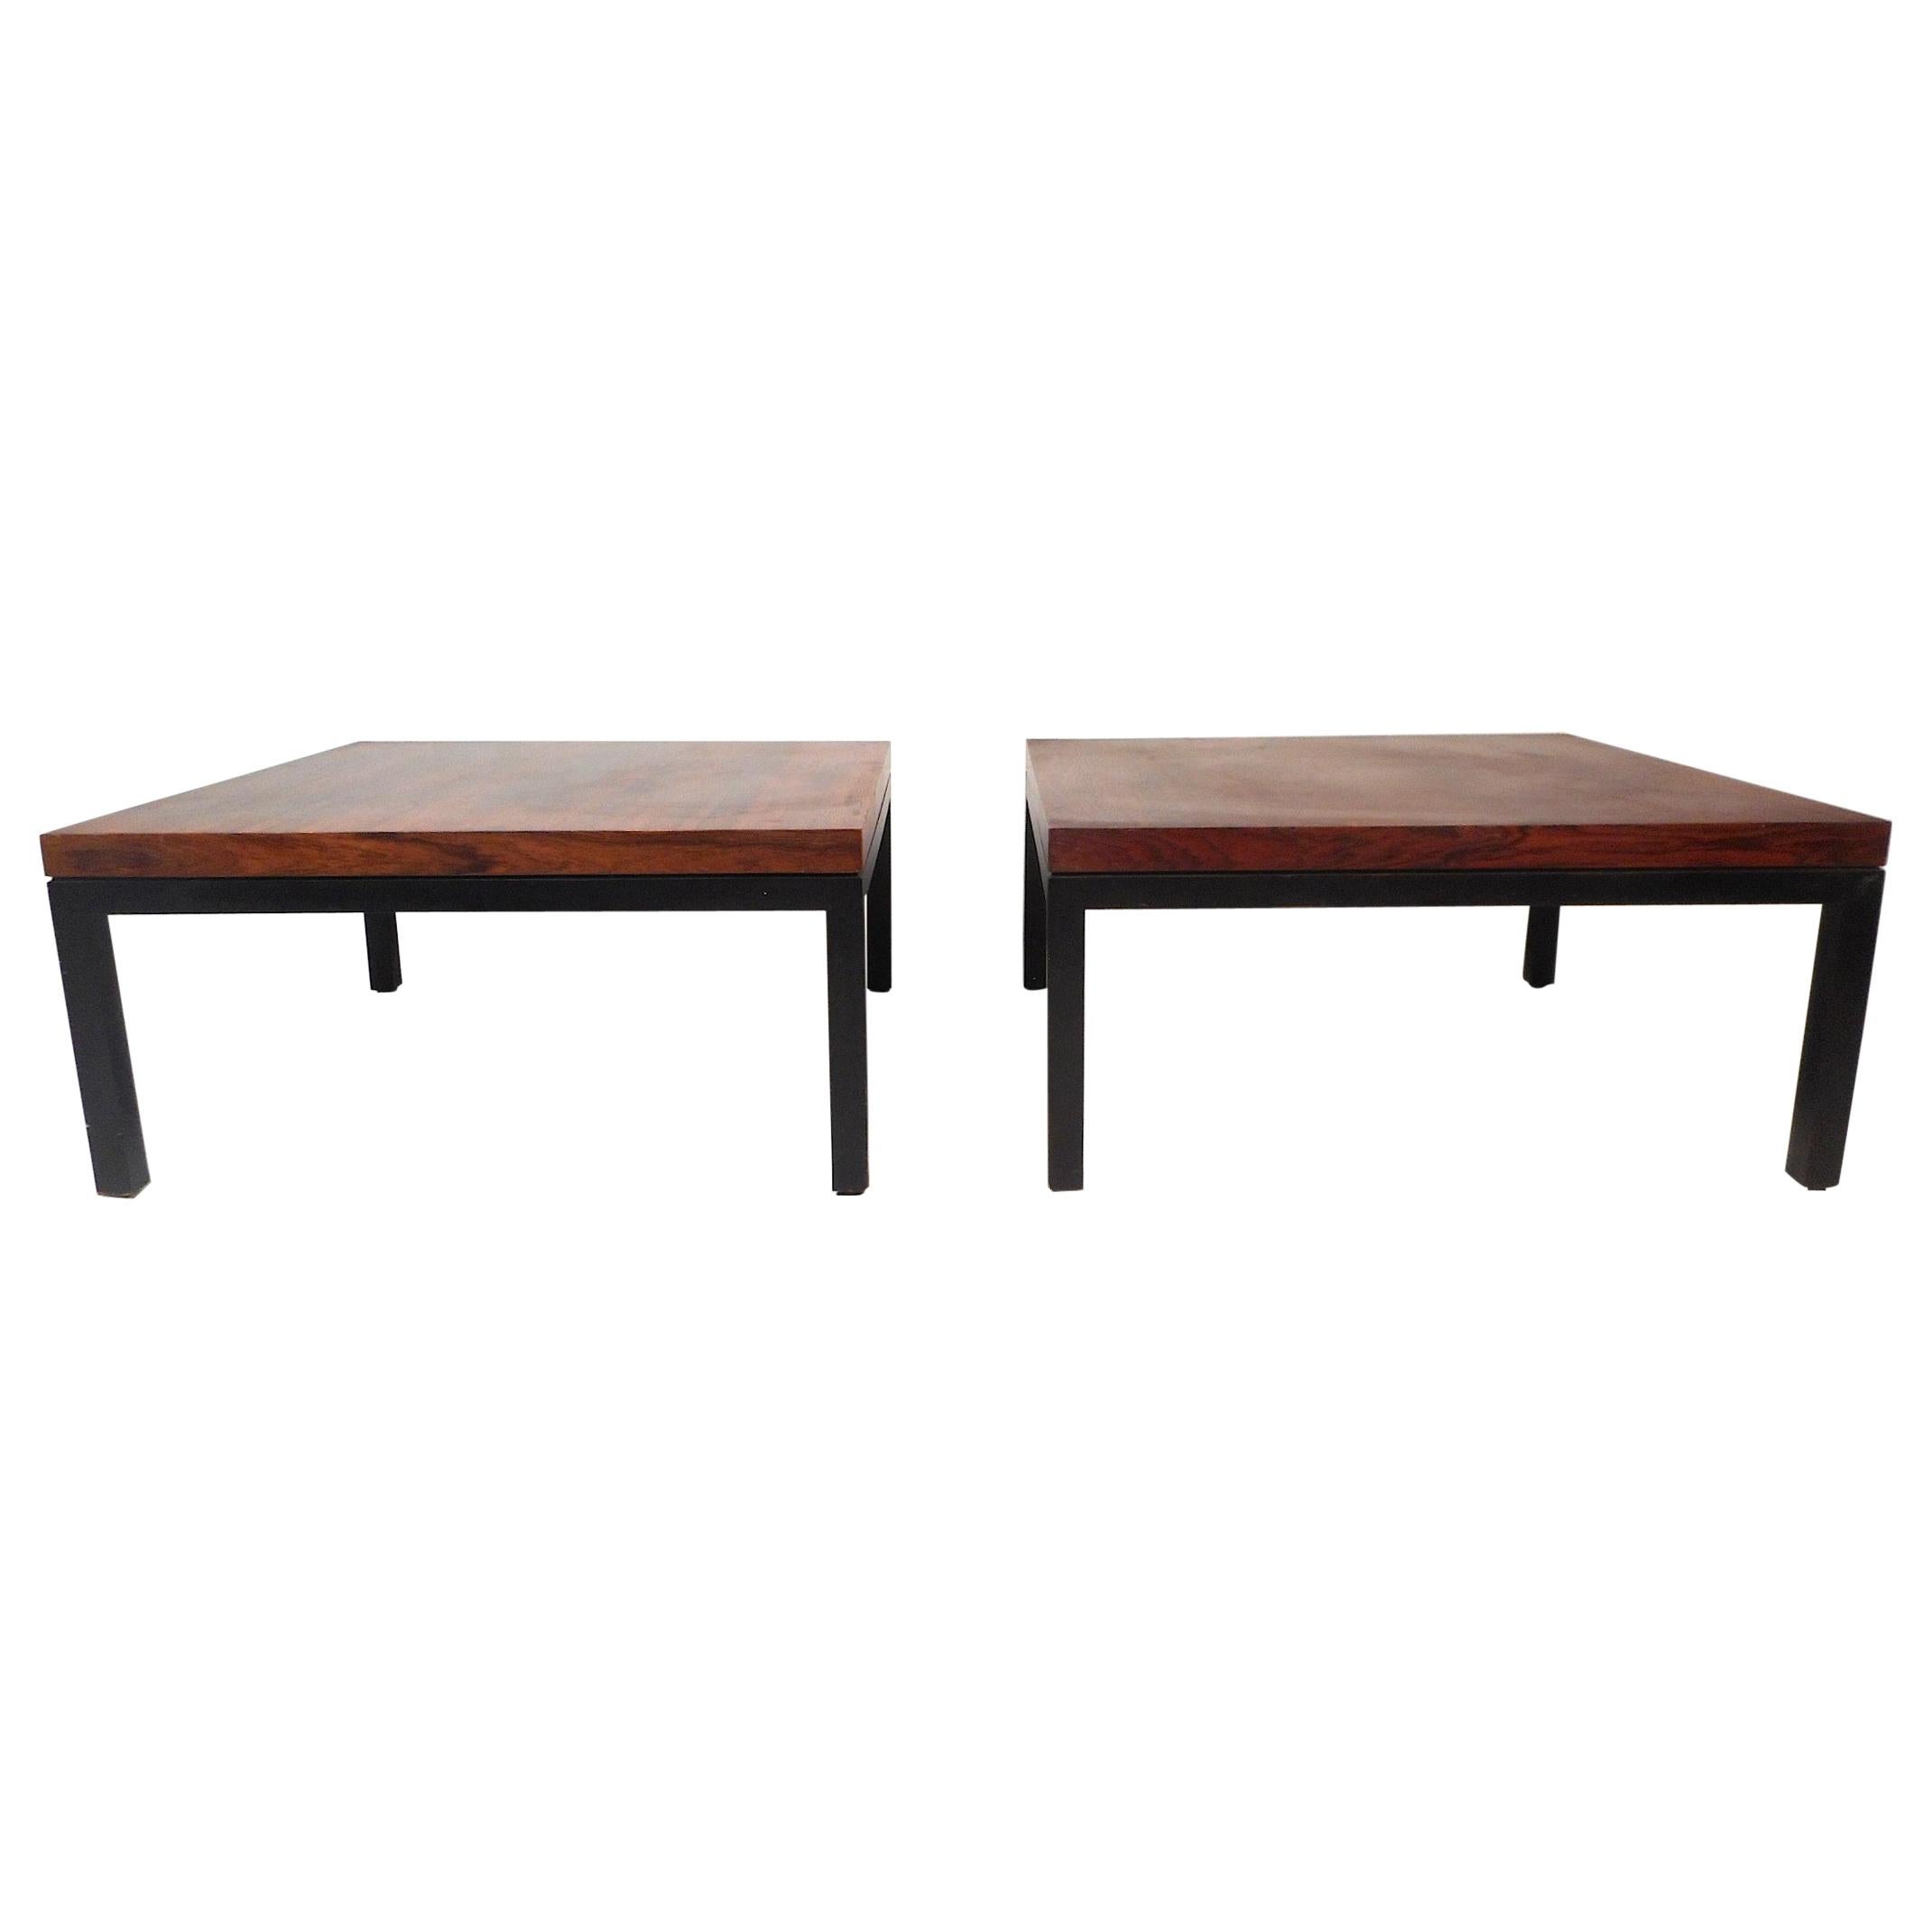 Pair of Midcentury Rosewood Coffee Tables by Milo Baughman for Thayer Coggin